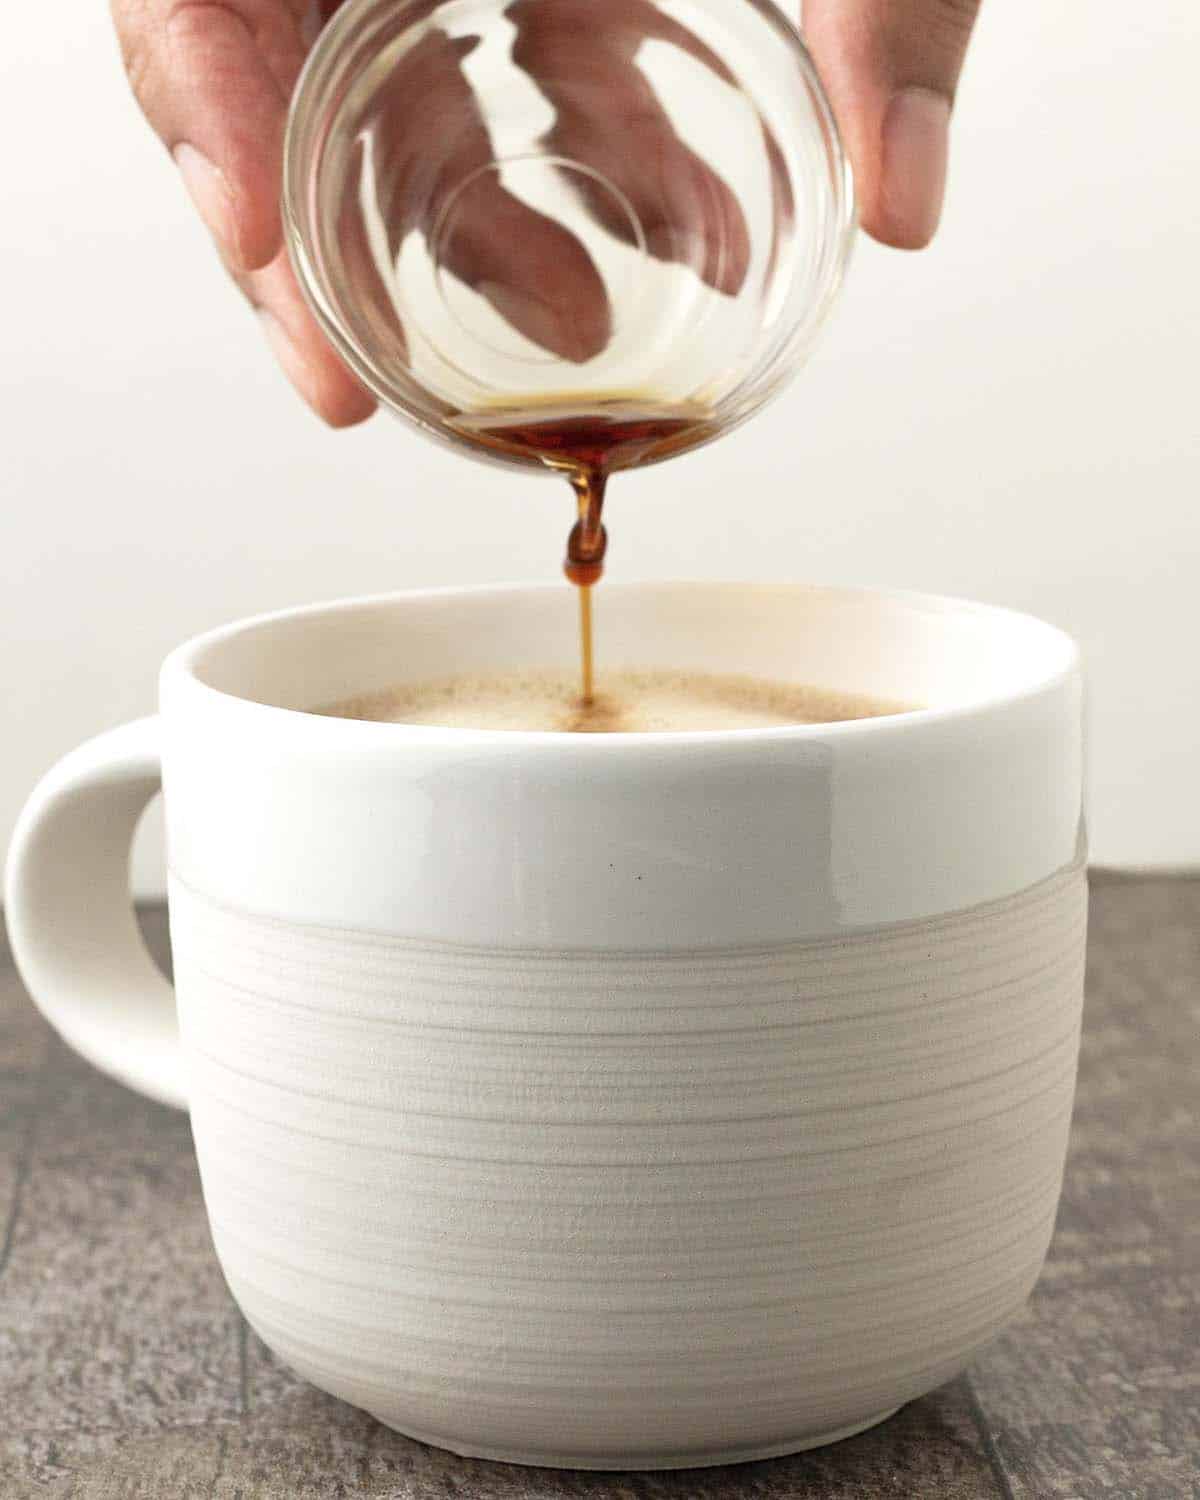 A hand pouring vanilla extract from a small glass bowl into a mug.